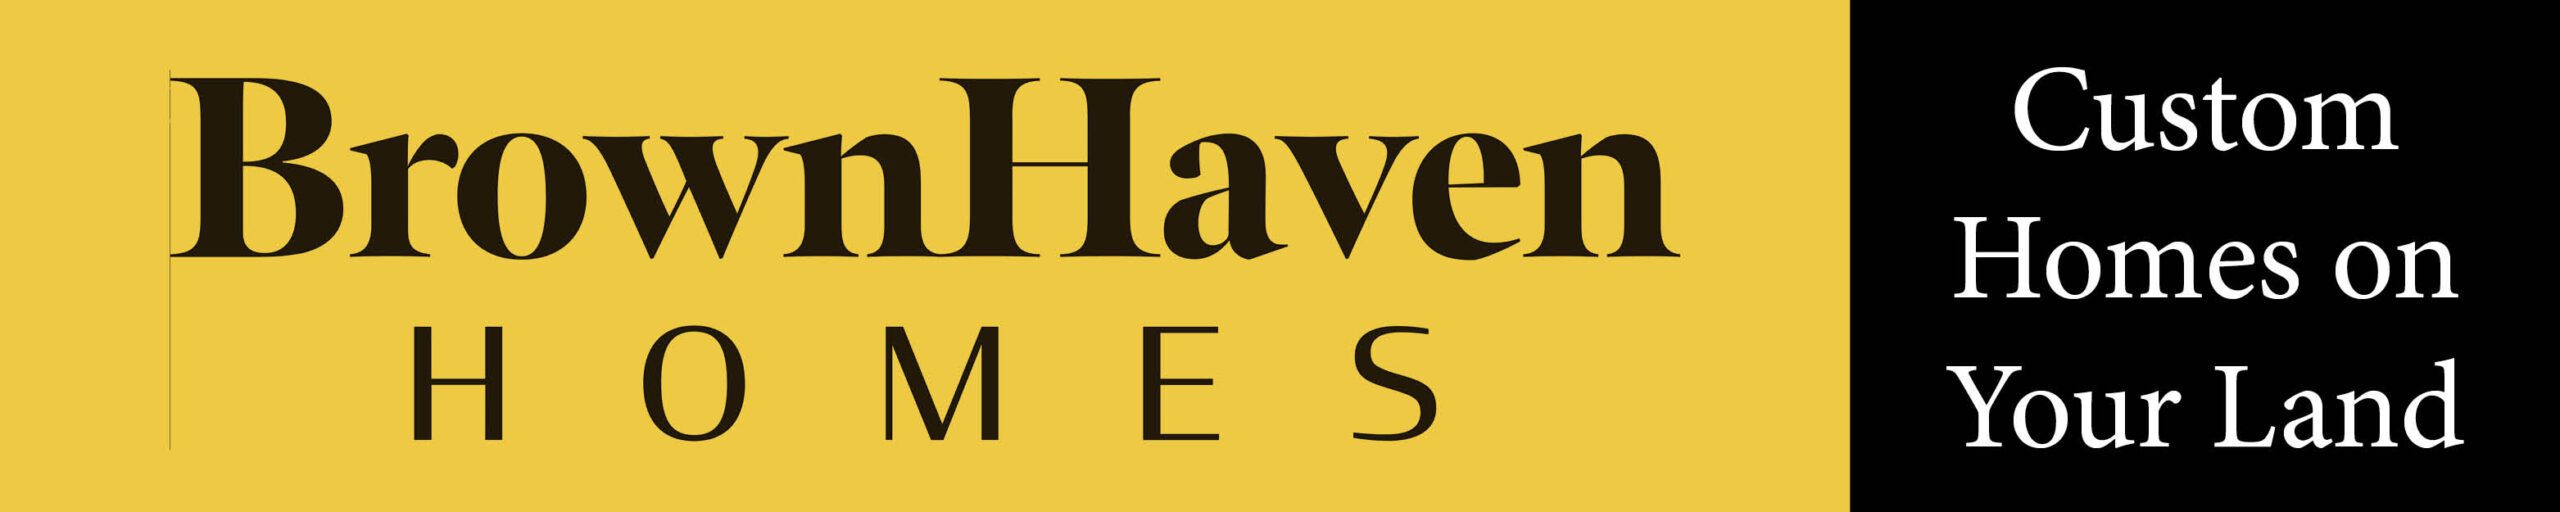 Brown Haven Homes Web Ad